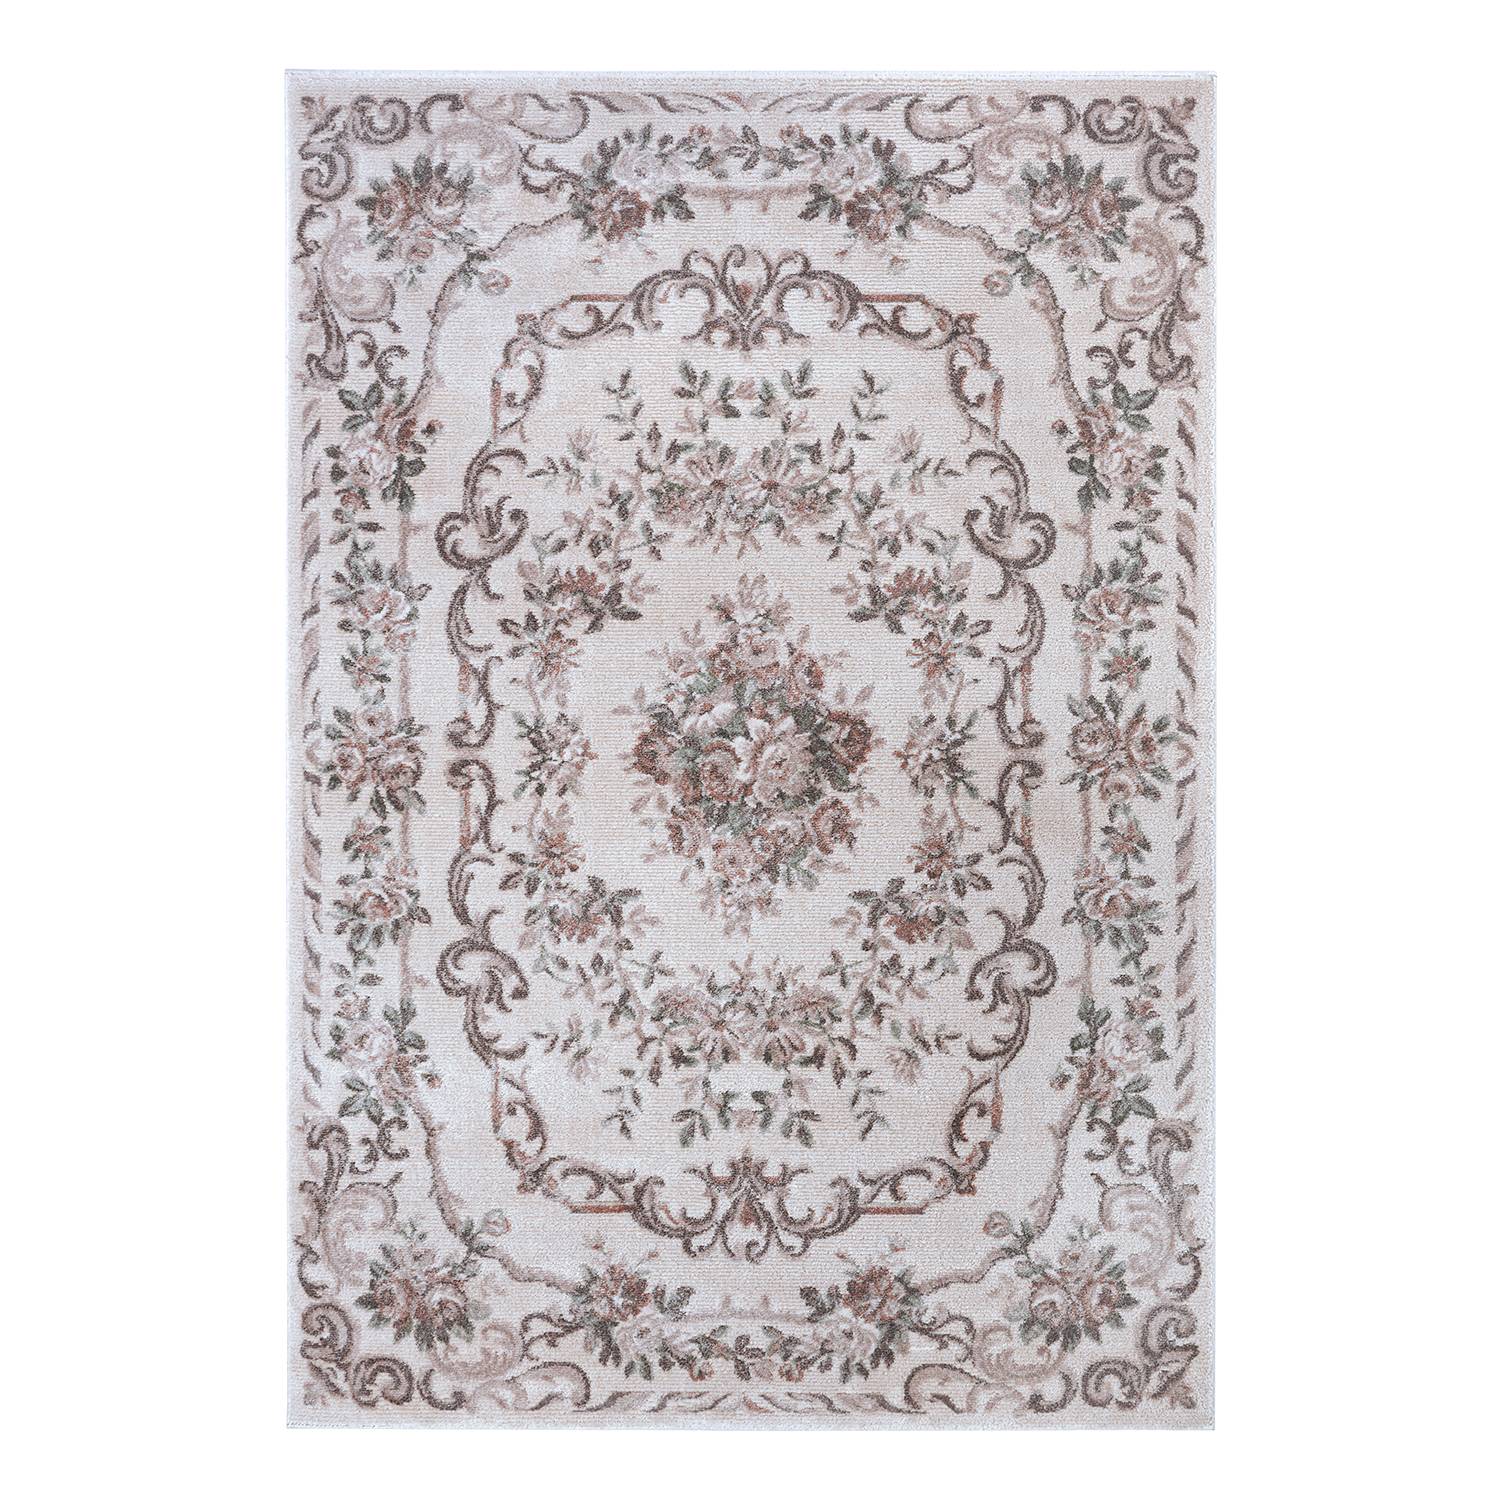 Image of Tapis Aubusson Flore 000000001000244239